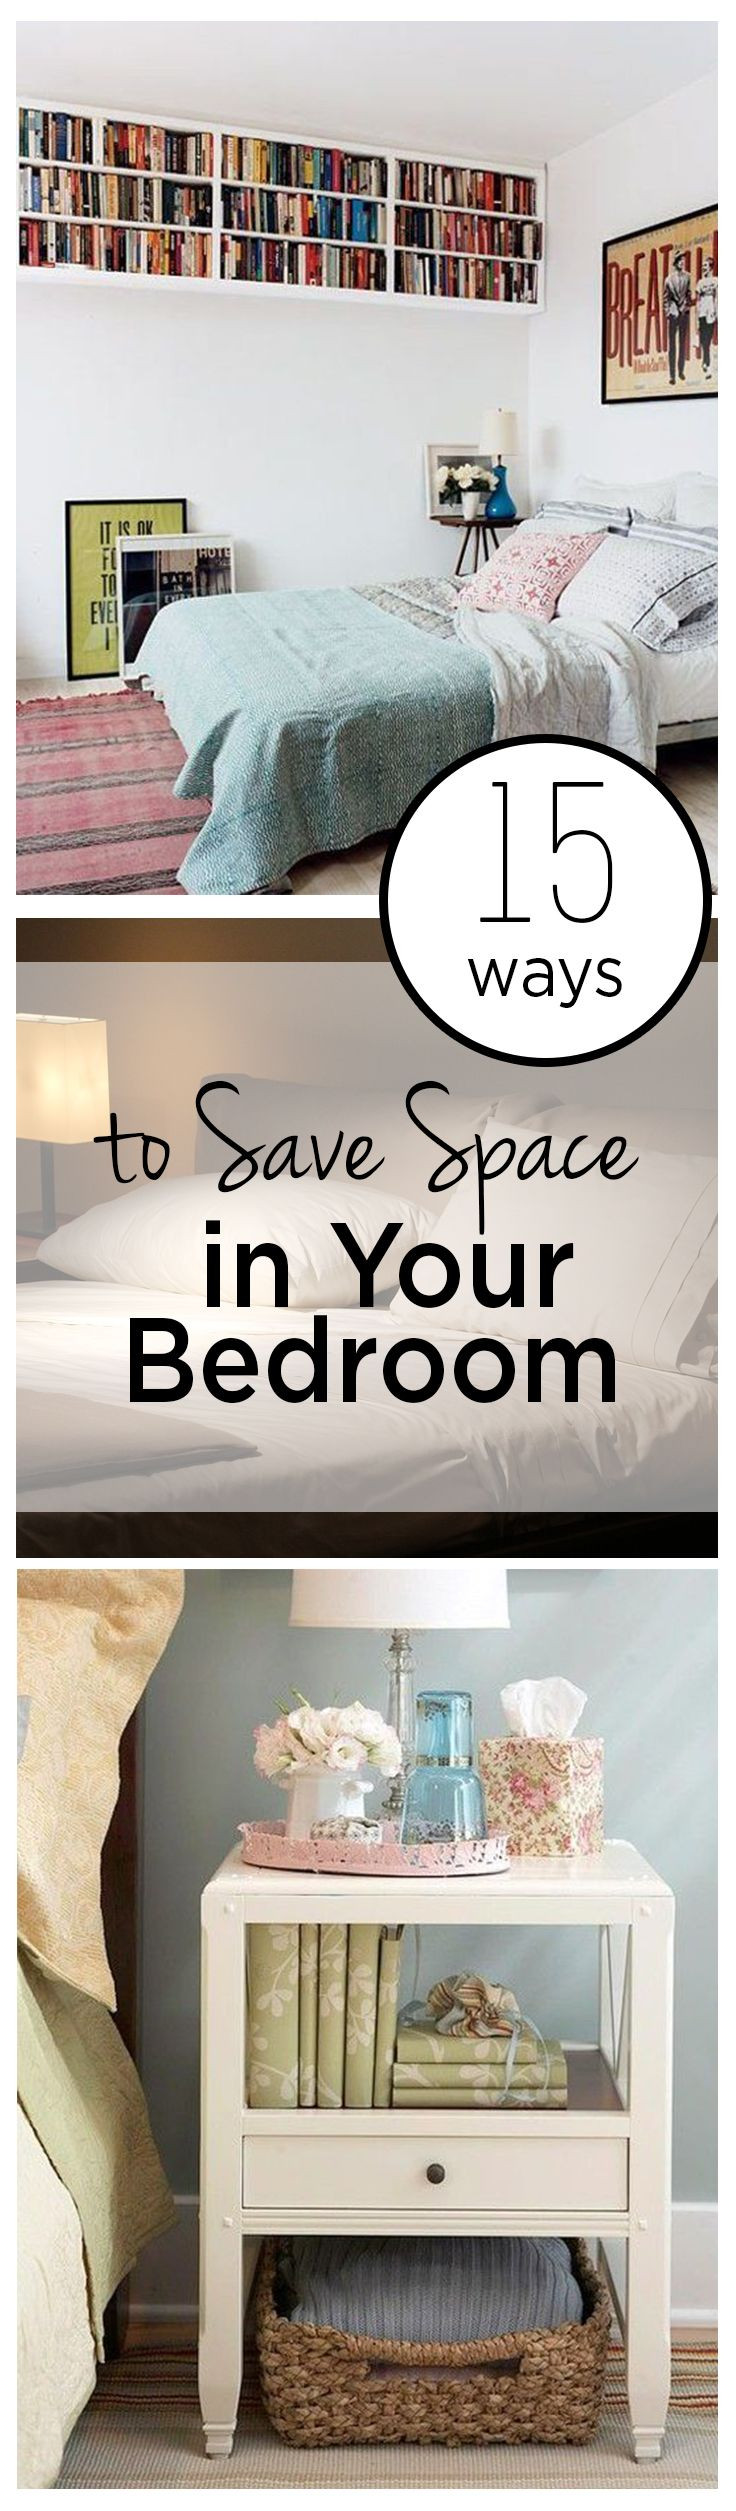 Diy Inneneinrichtung
 15 Ways to Save Space in Your Bedroom